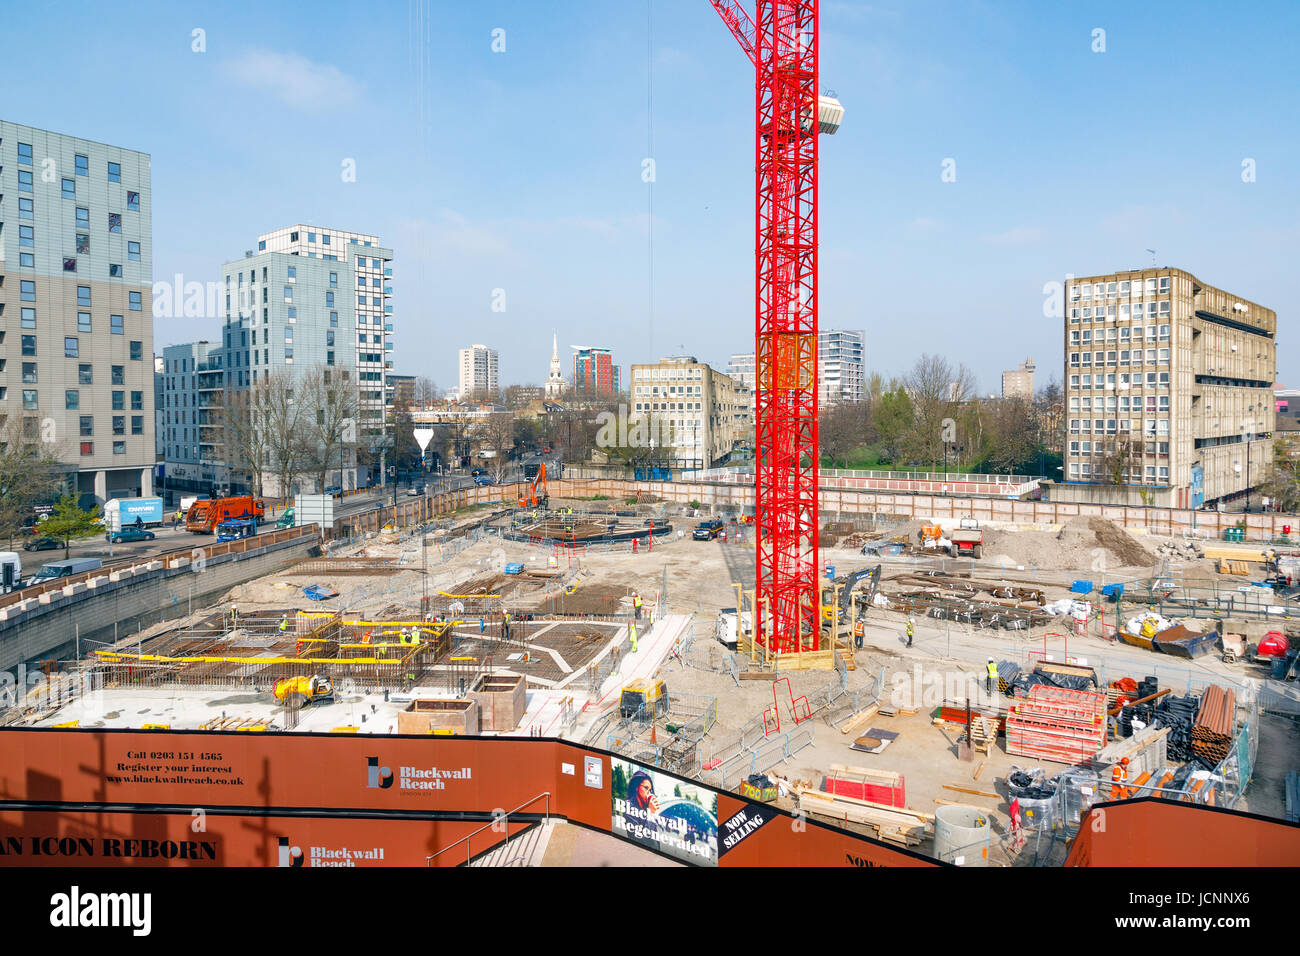 London, UK - March 27, 2017: construction site of Blackwall Reach, a new housing development in East London Stock Photo